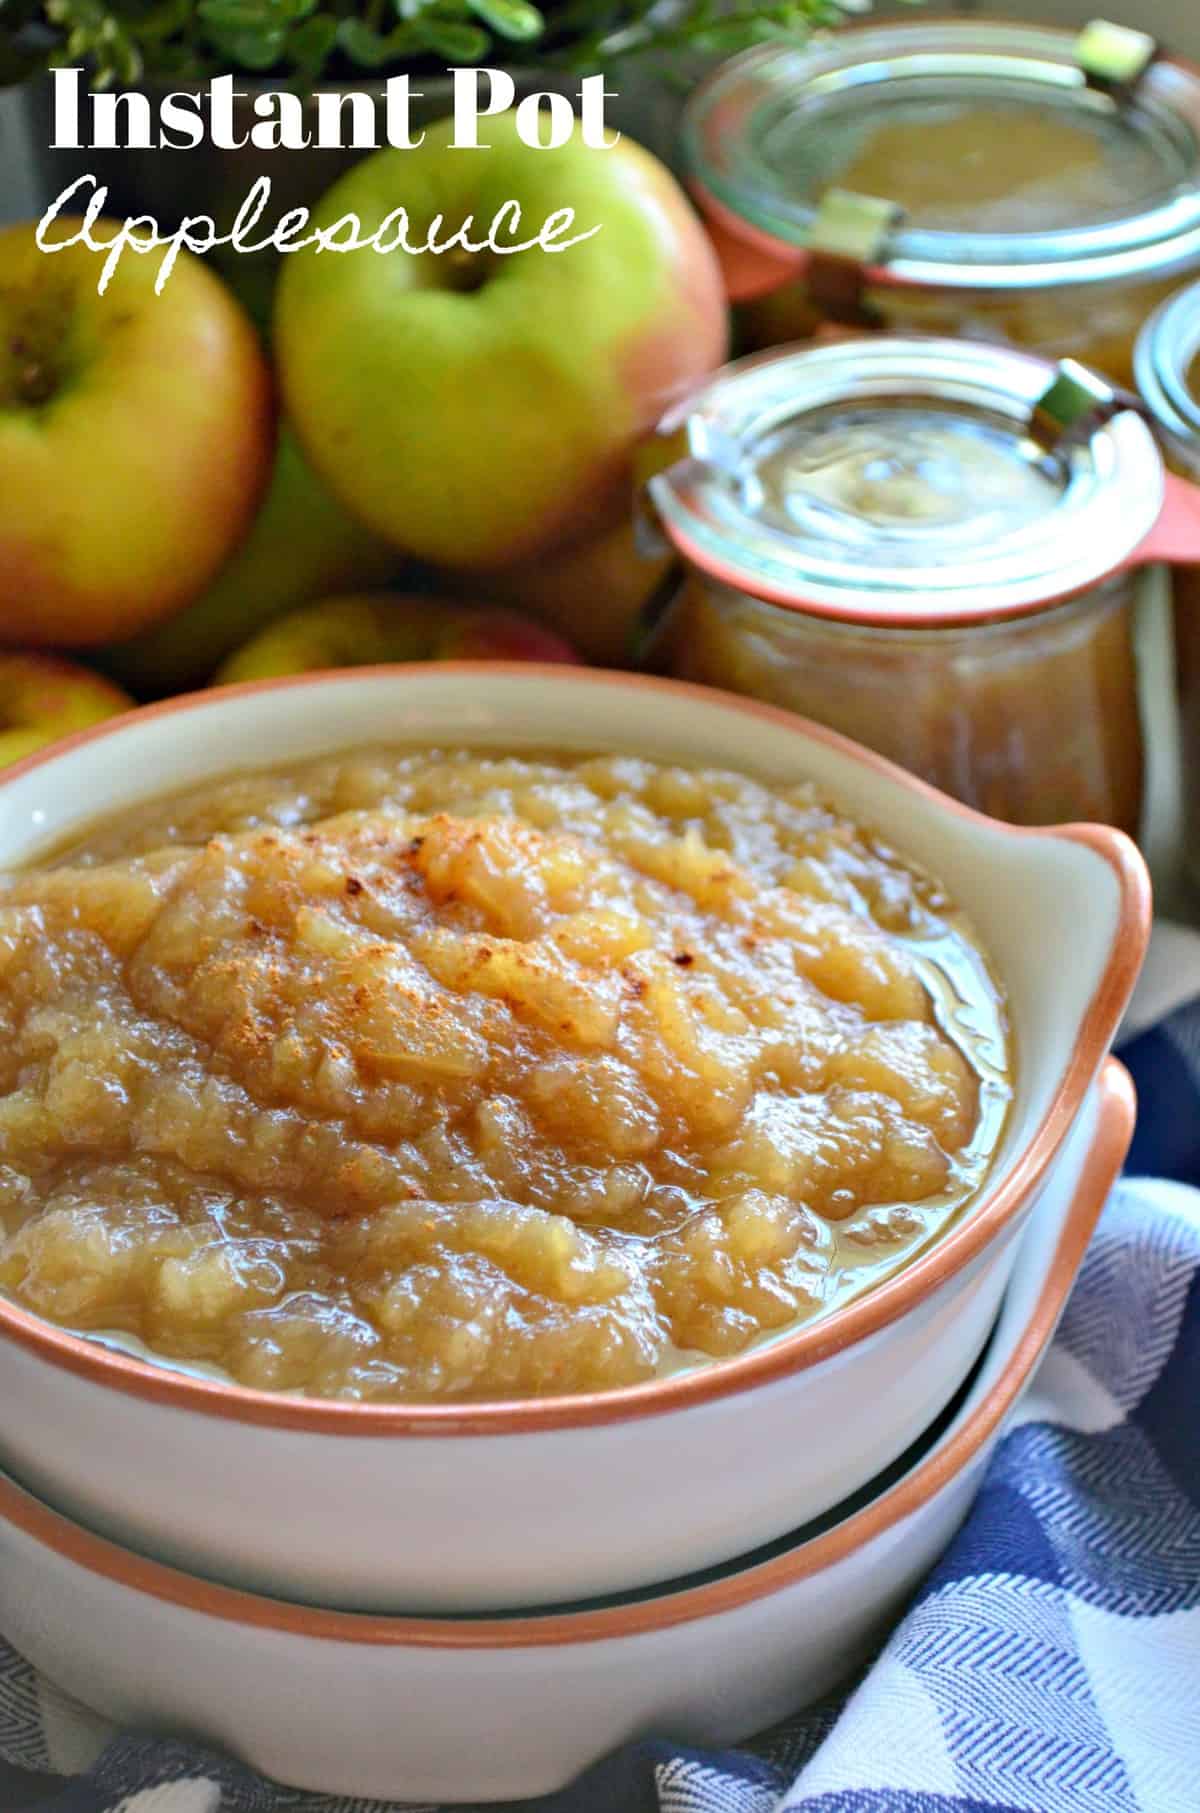 Closeup bowl of applesauce topped with cinnamon with apples in background and title text.